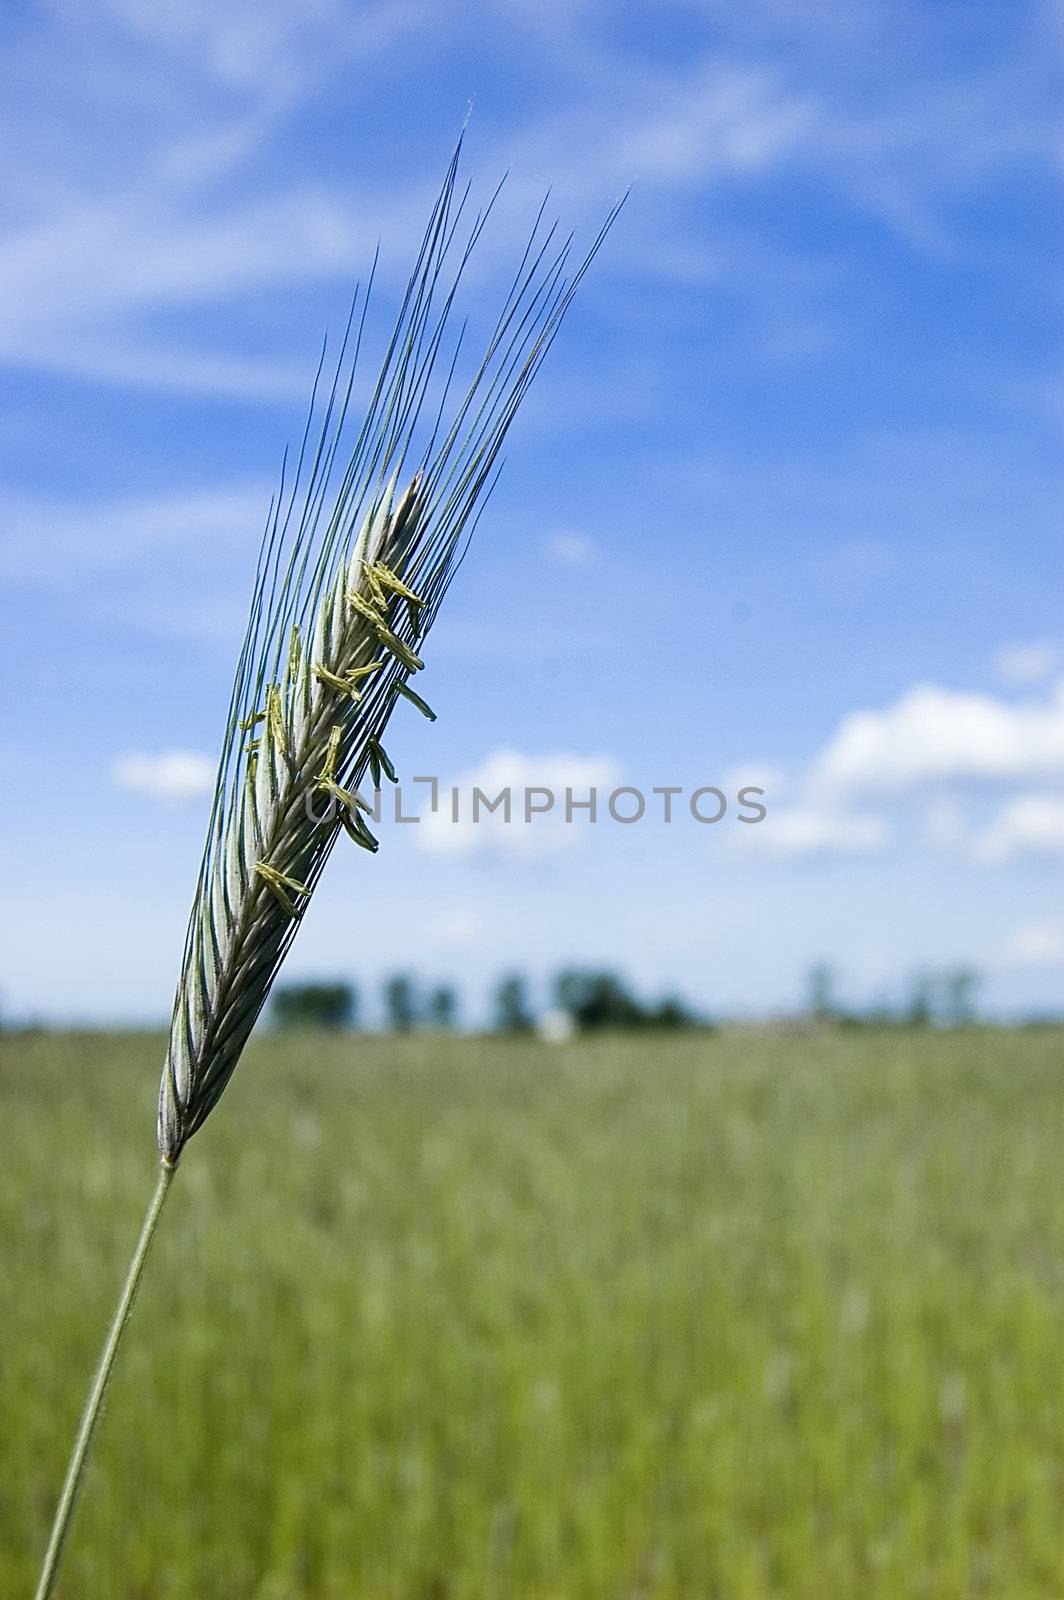 Green fresh wheat filed on spring with blue sky